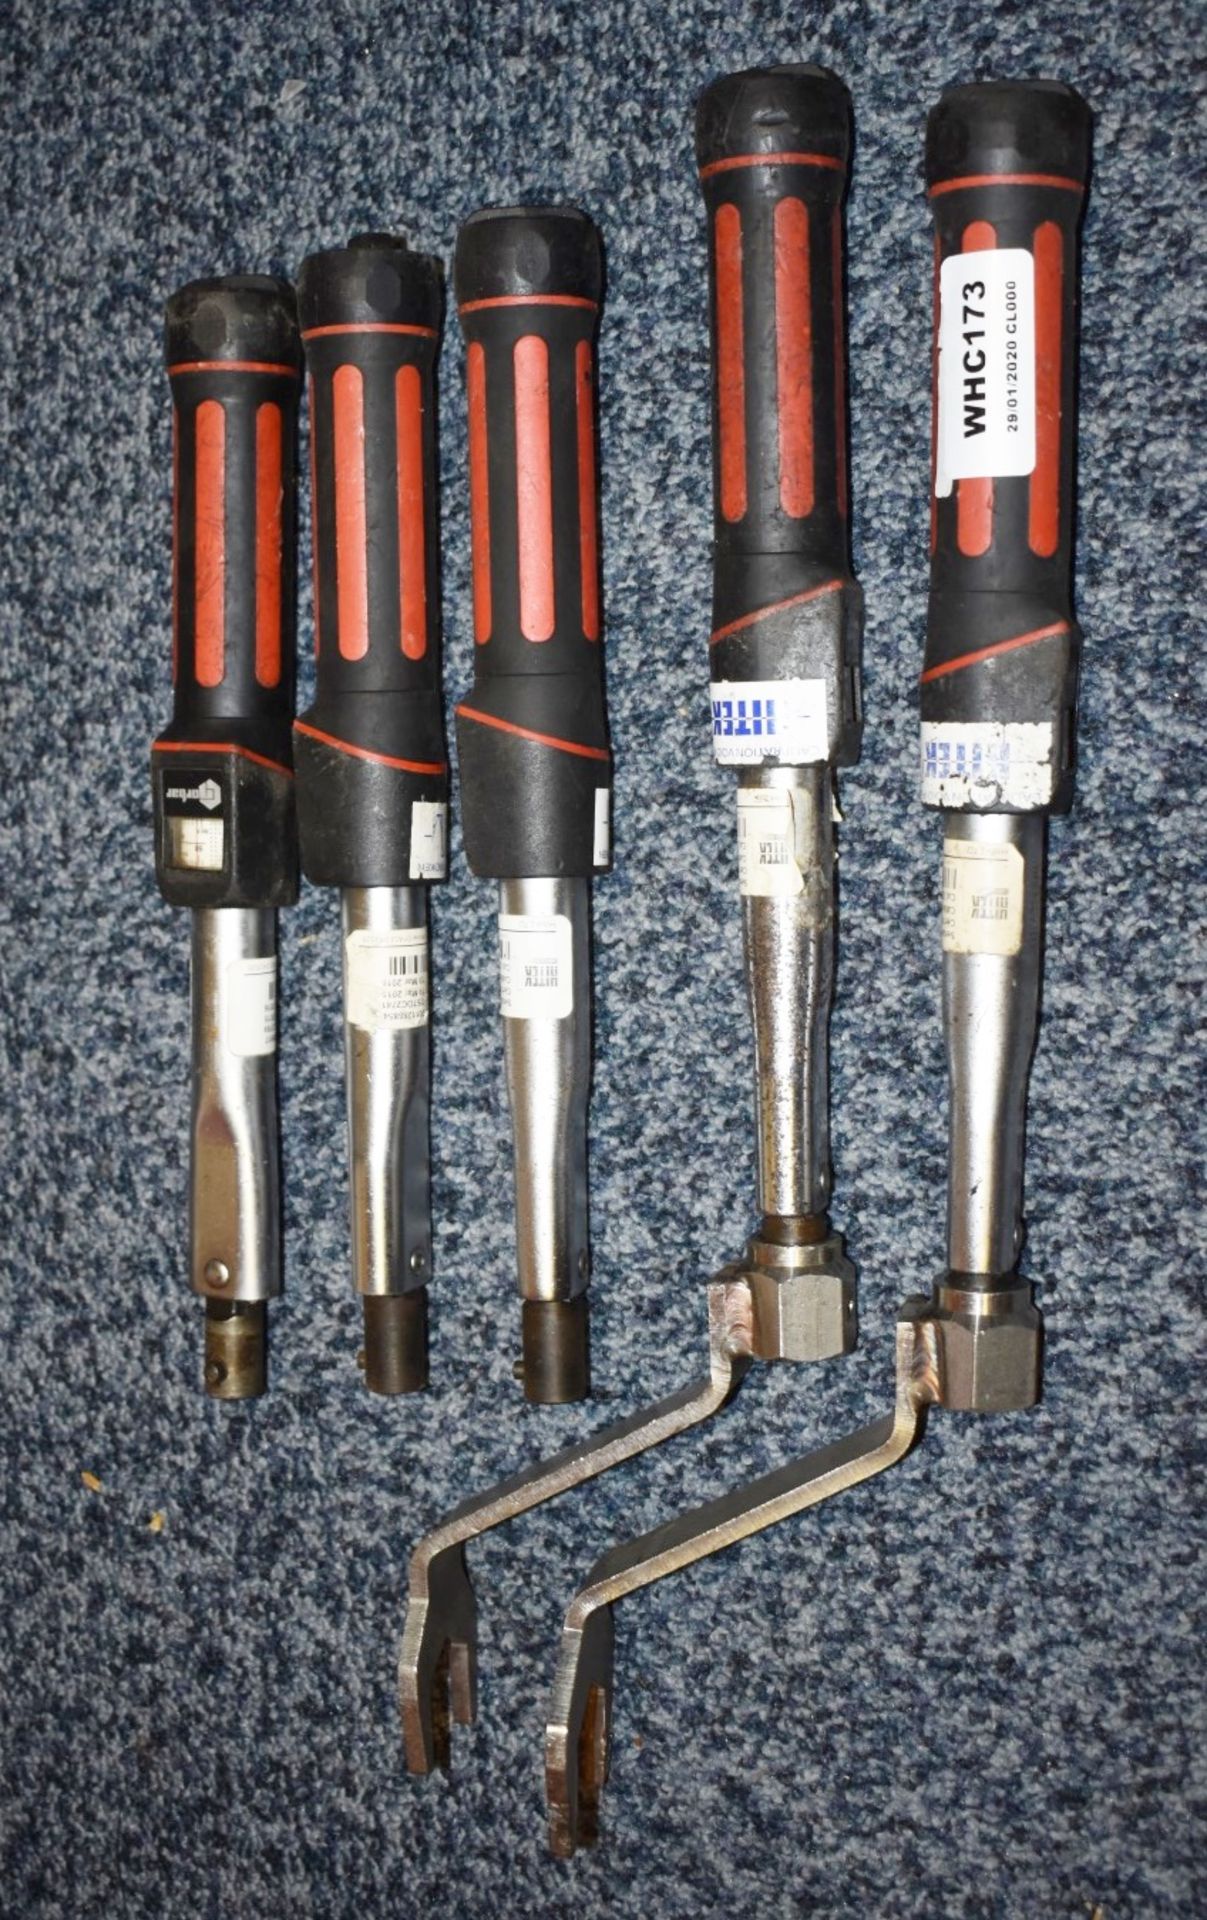 5 x Norbar 60TH Adjustable Torque Wrench Tools With Two Attachments - Approx RRP £550 - Ref WHC173 - Image 3 of 6